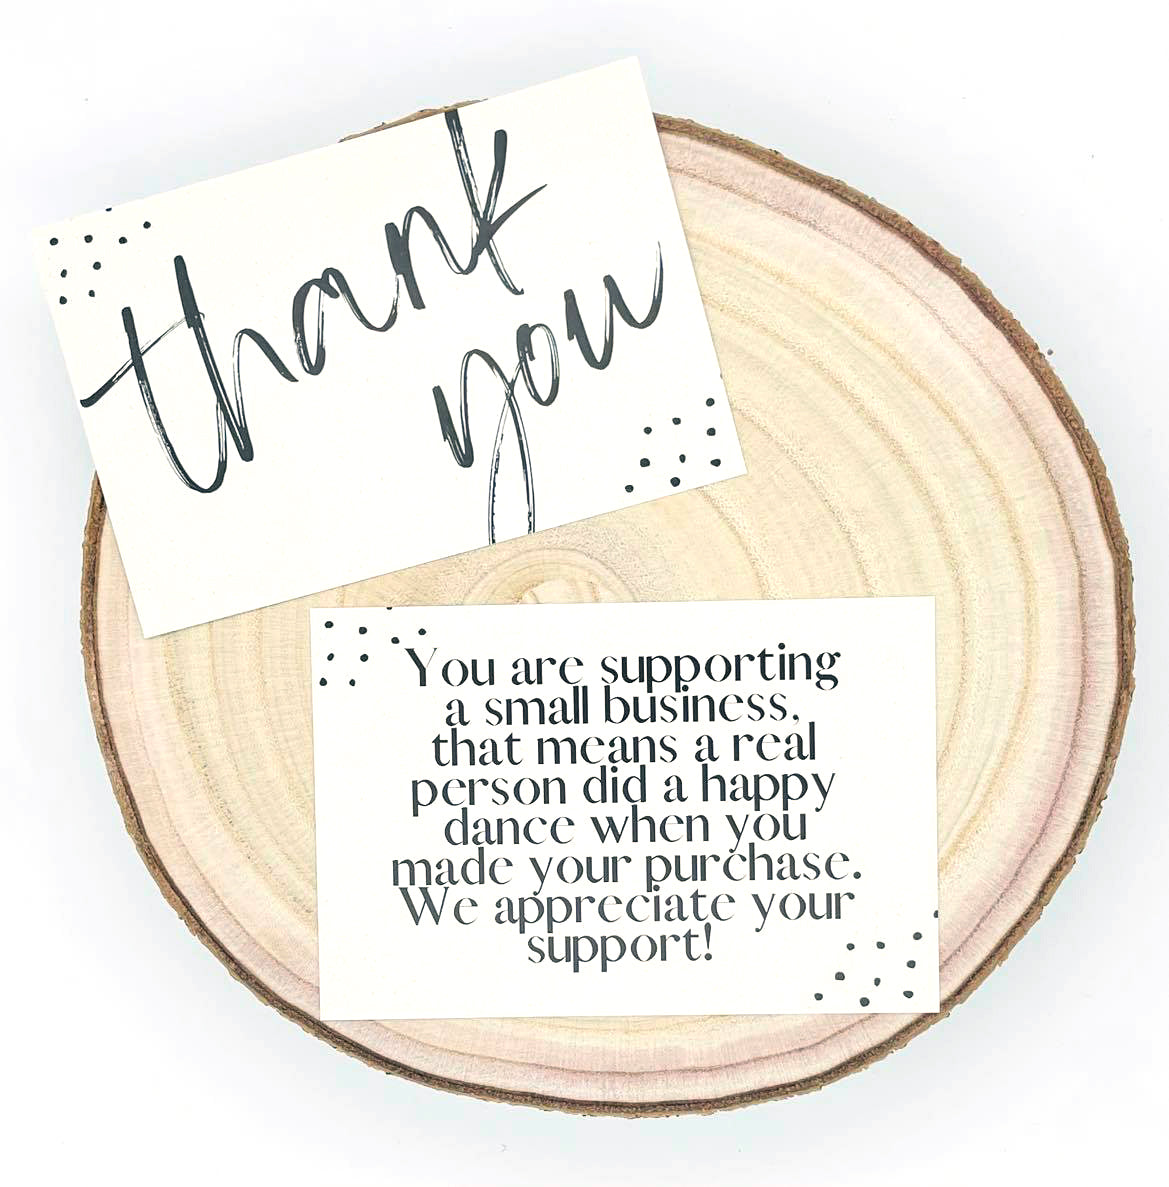 business thank you card